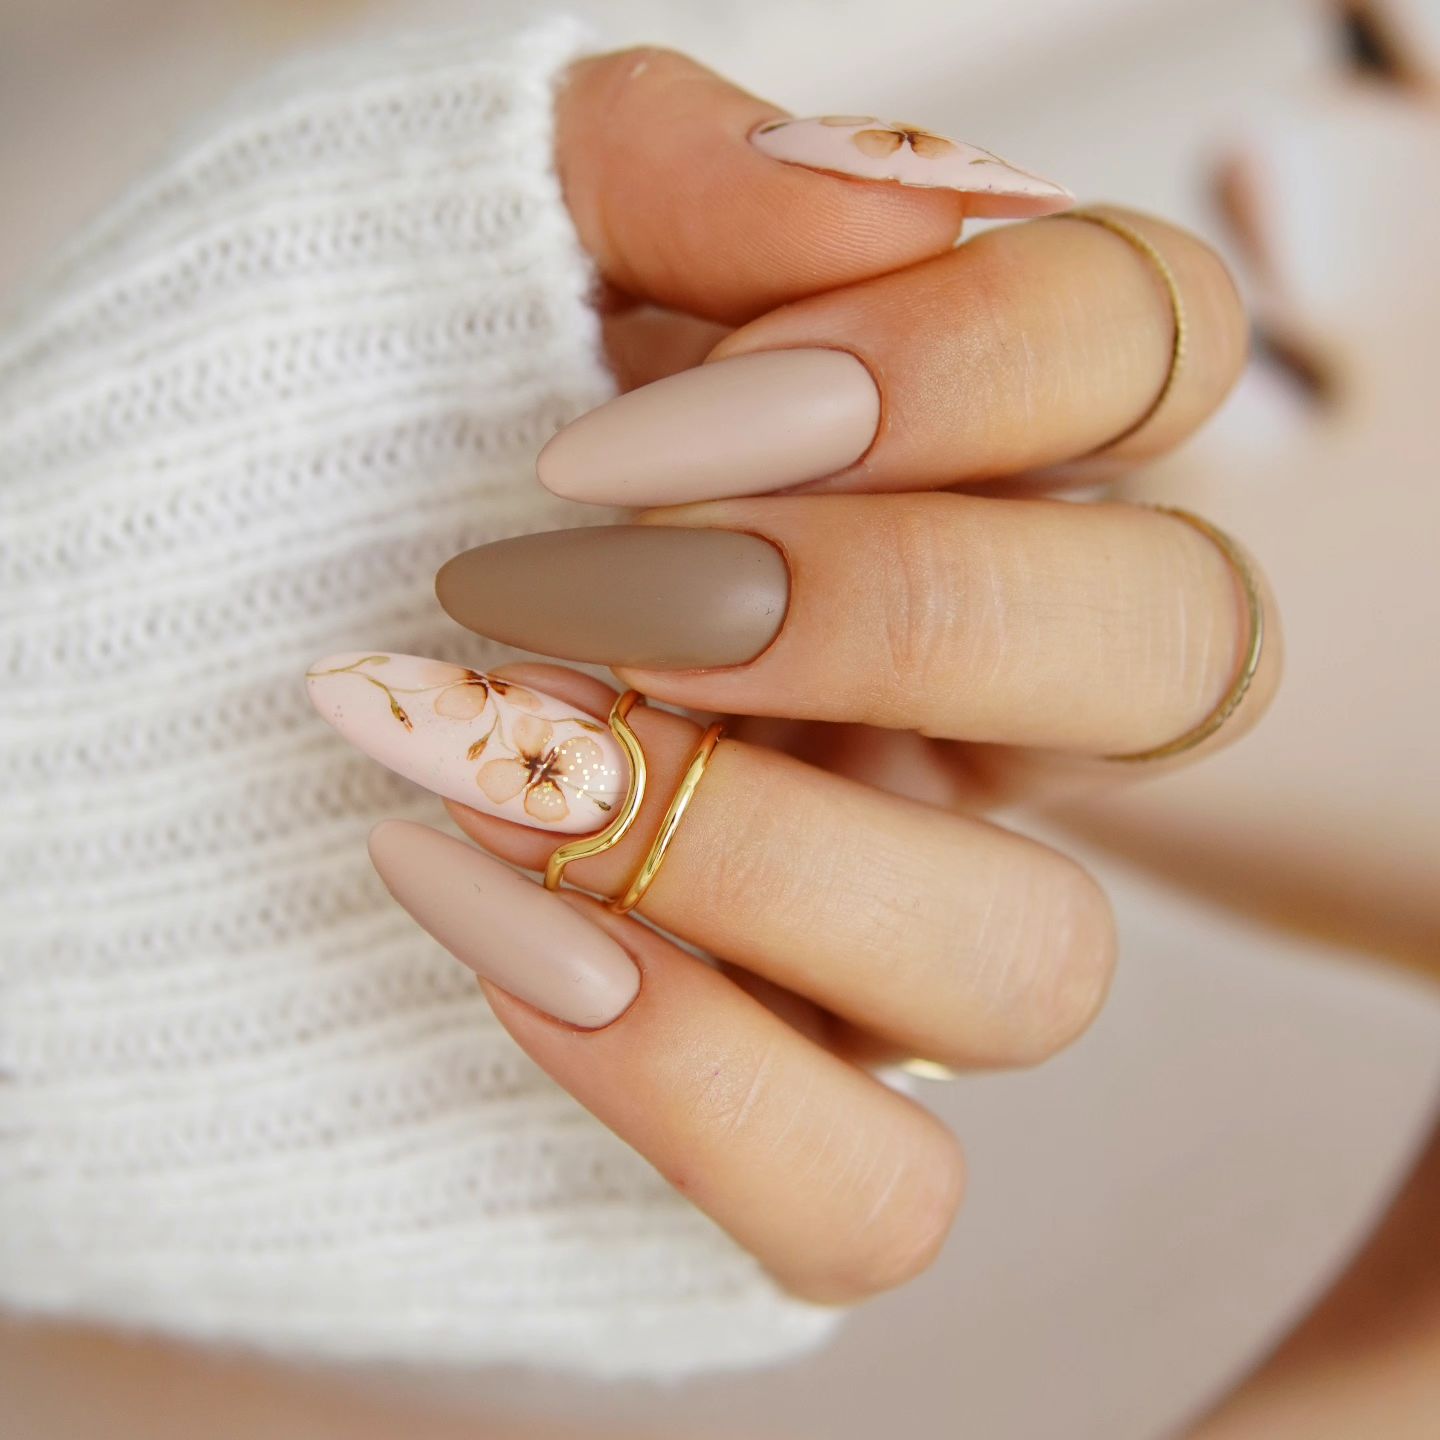 Oval Light Brown Nails with Floral Design